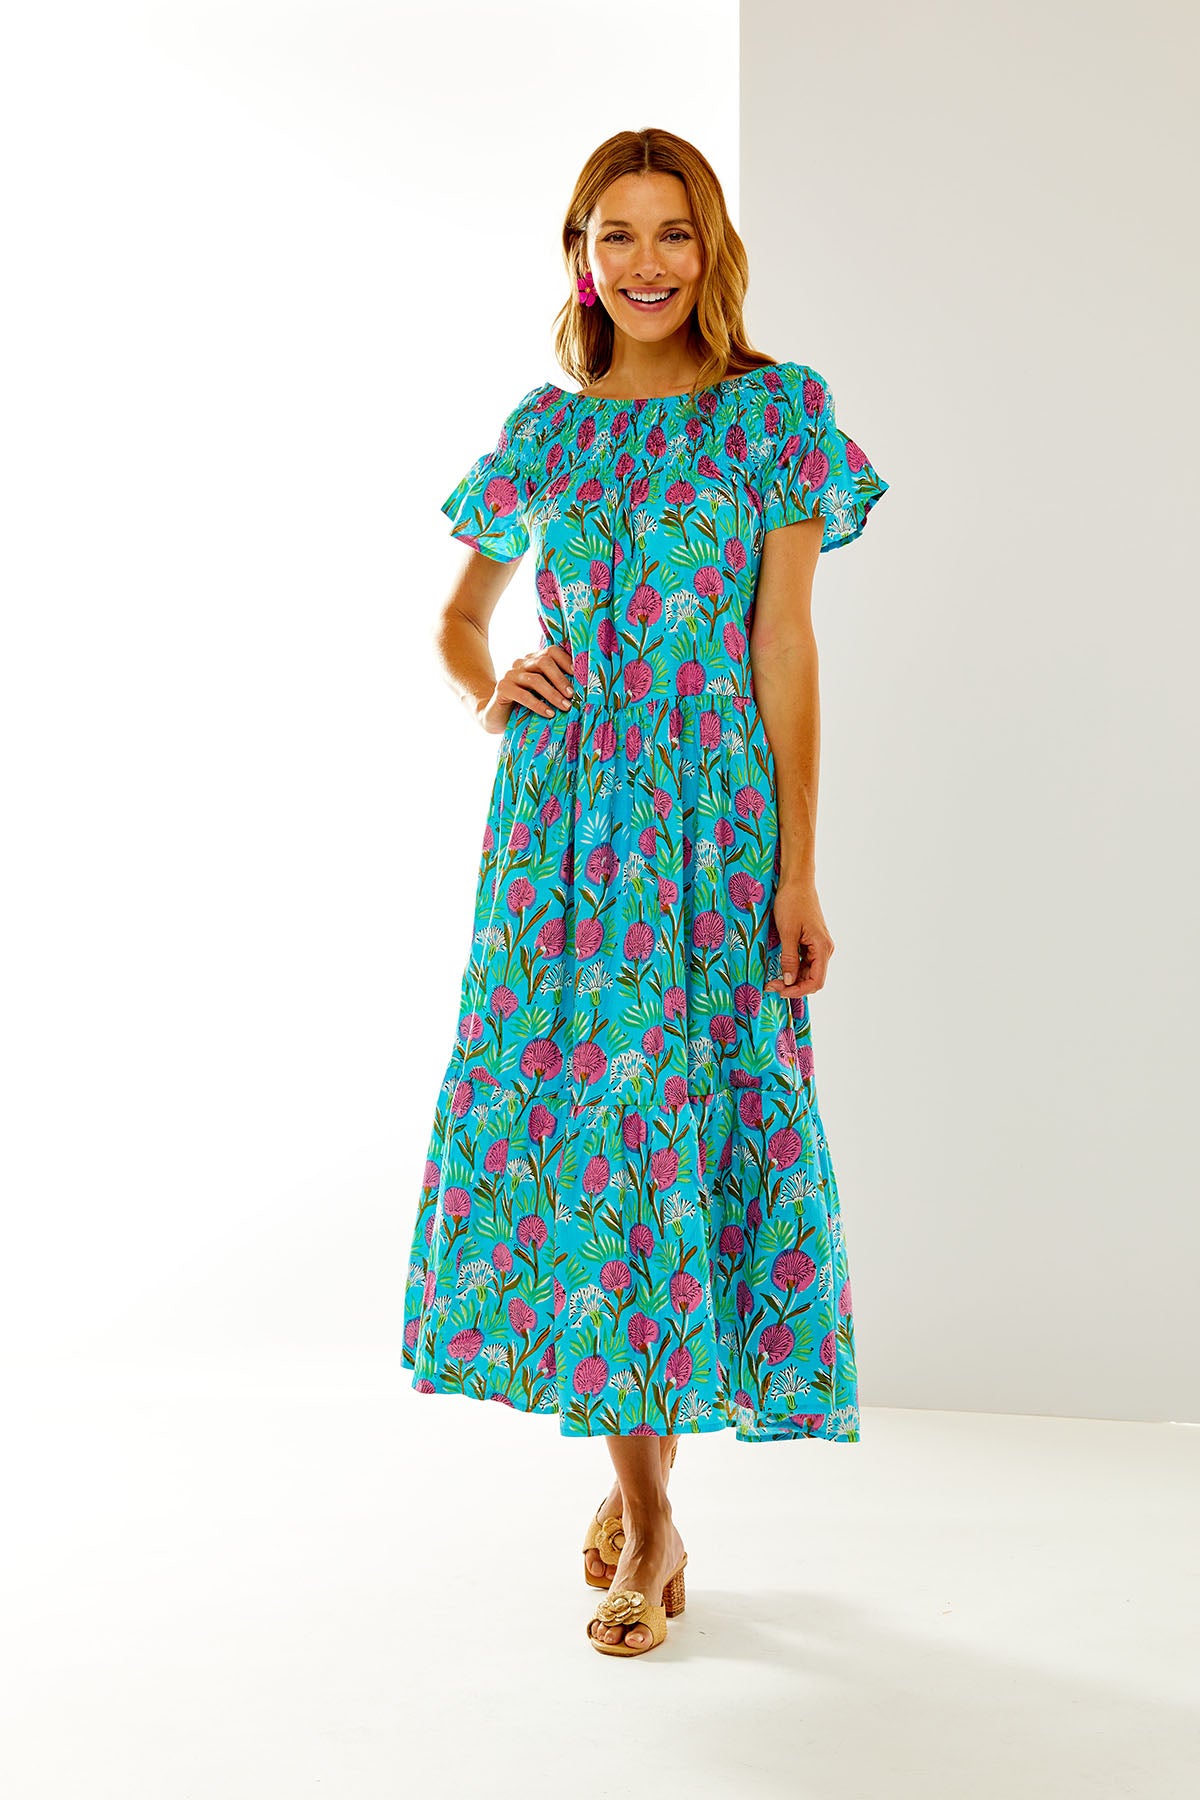 Woman in turquoise floral dress